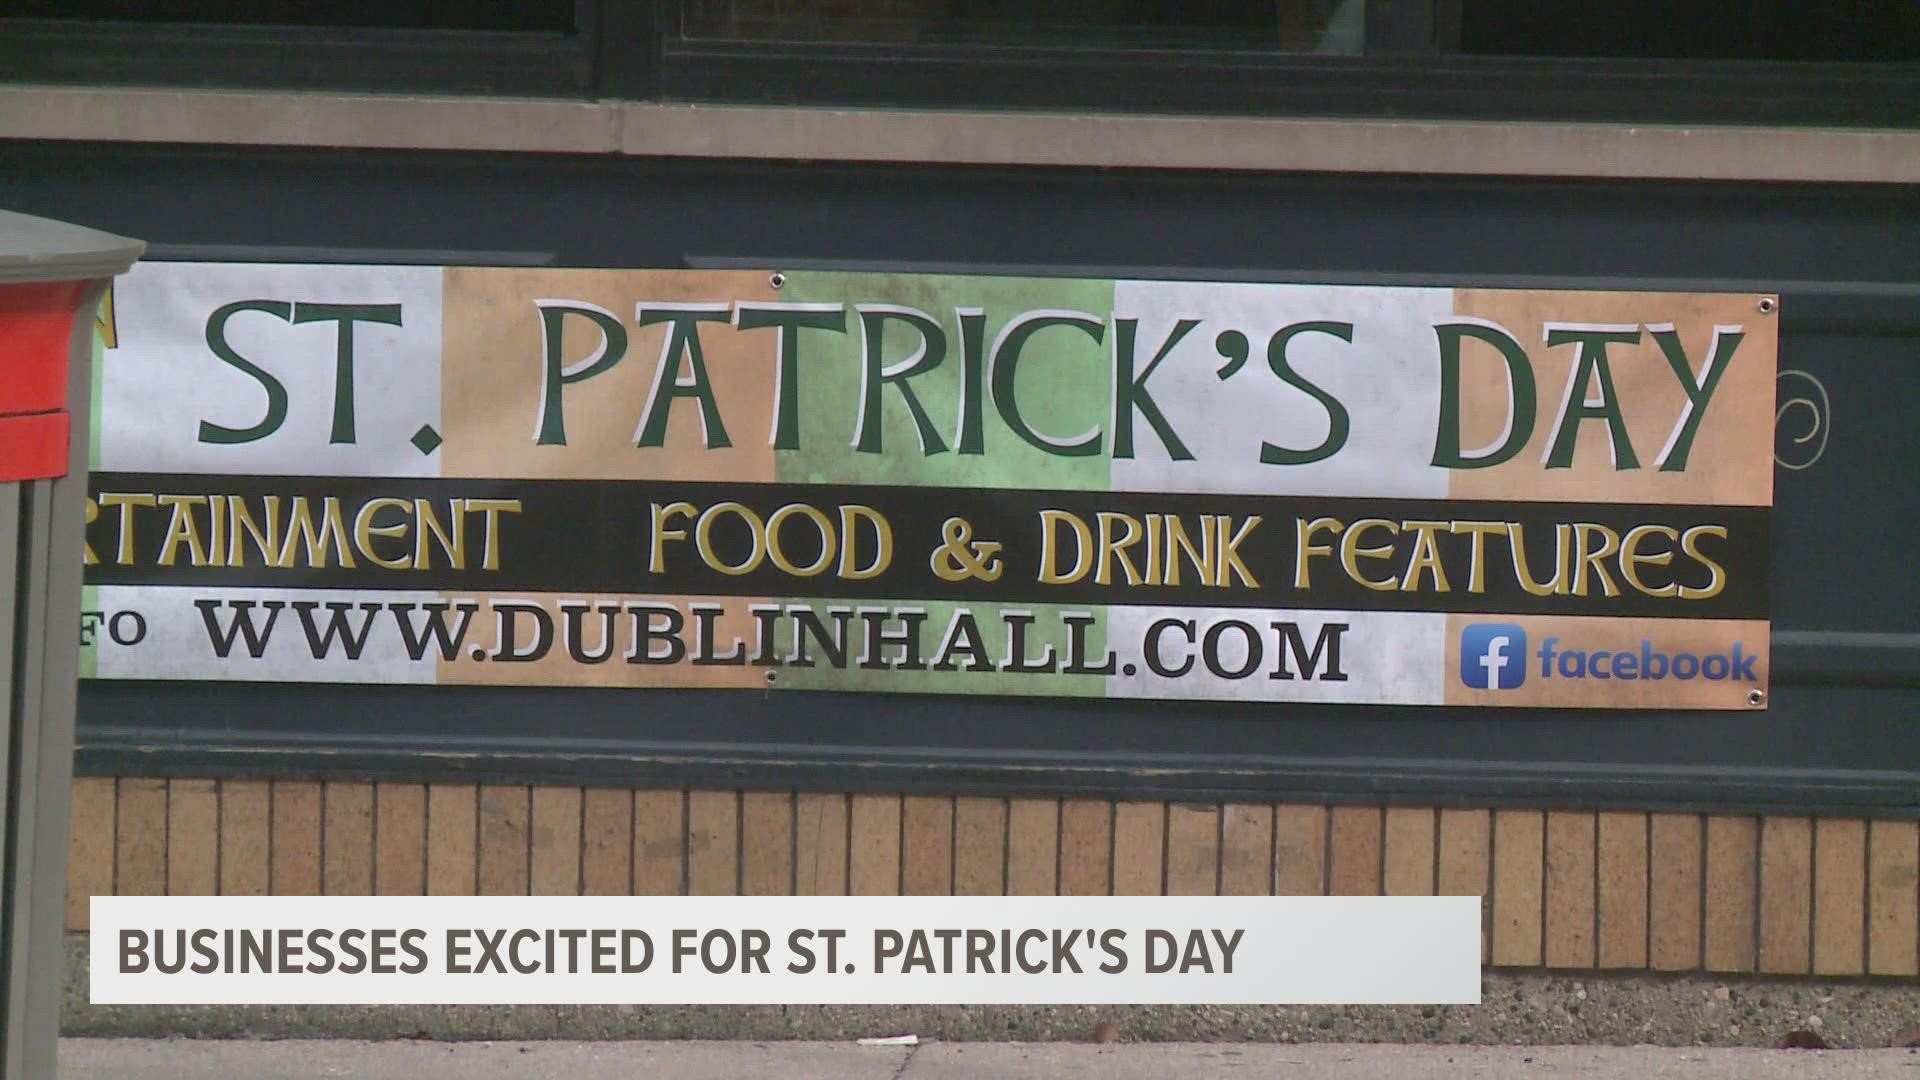 The Irish on Ionia cancellation is not putting a damper on St. Patrick's Day celebrations for local businesses.